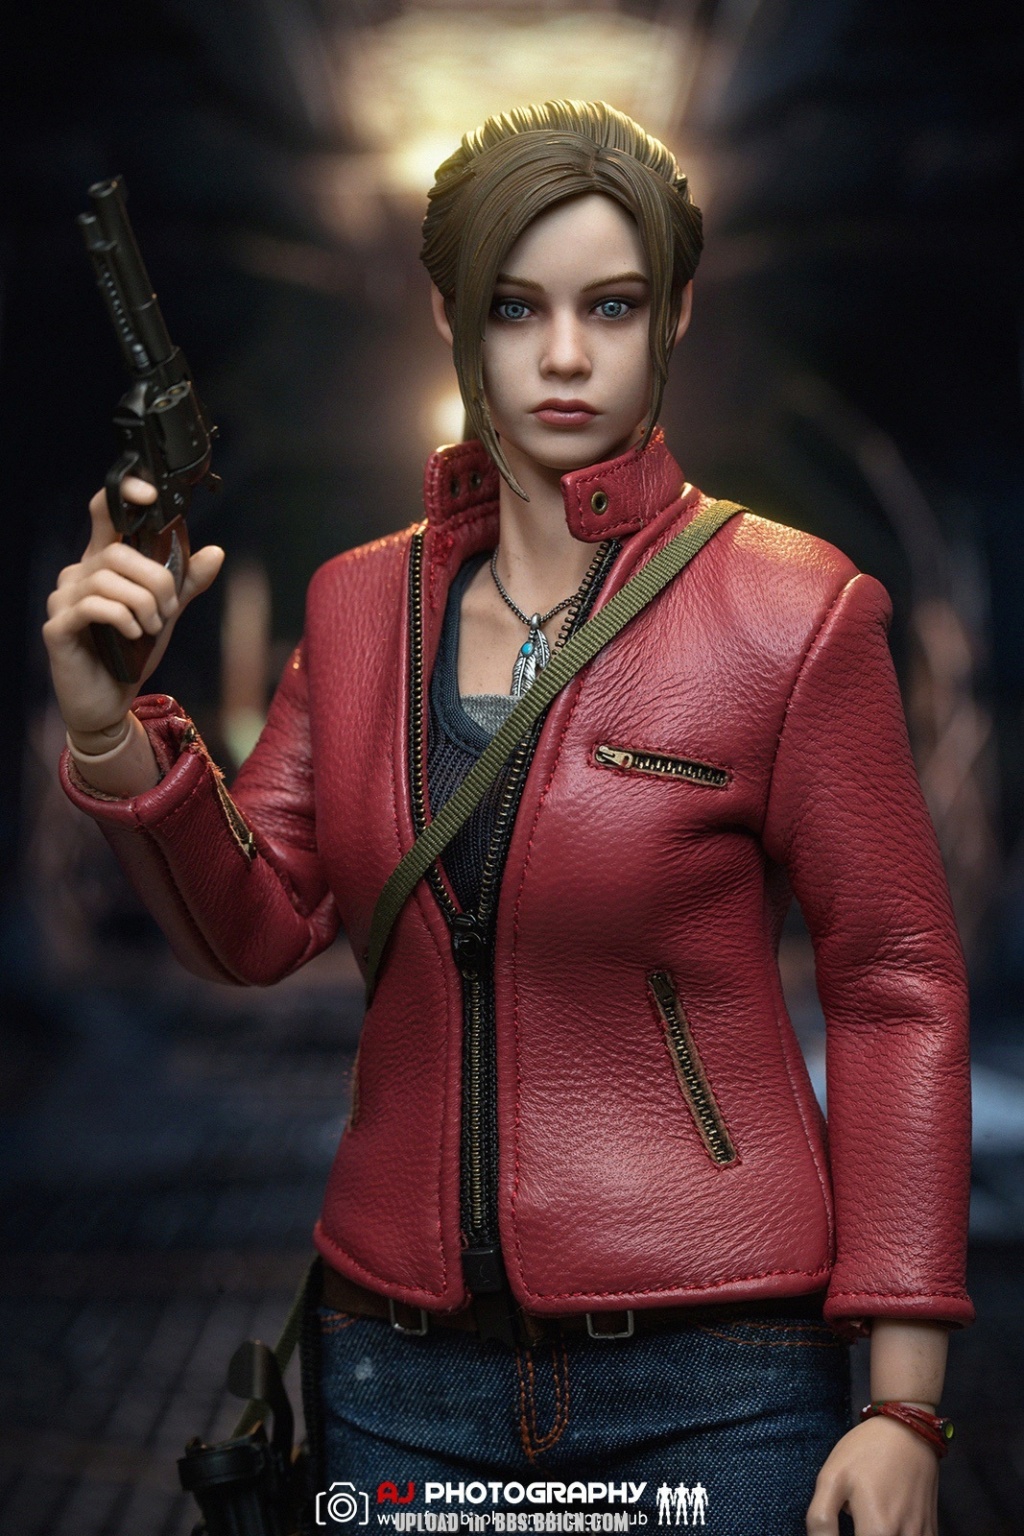 DMS031 - NEW PRODUCT: NAUTS & DAMTOYS: DMS031 1/6 Scale Resident Evil 2 - Claire Redfield (reissue?) 7a98a010